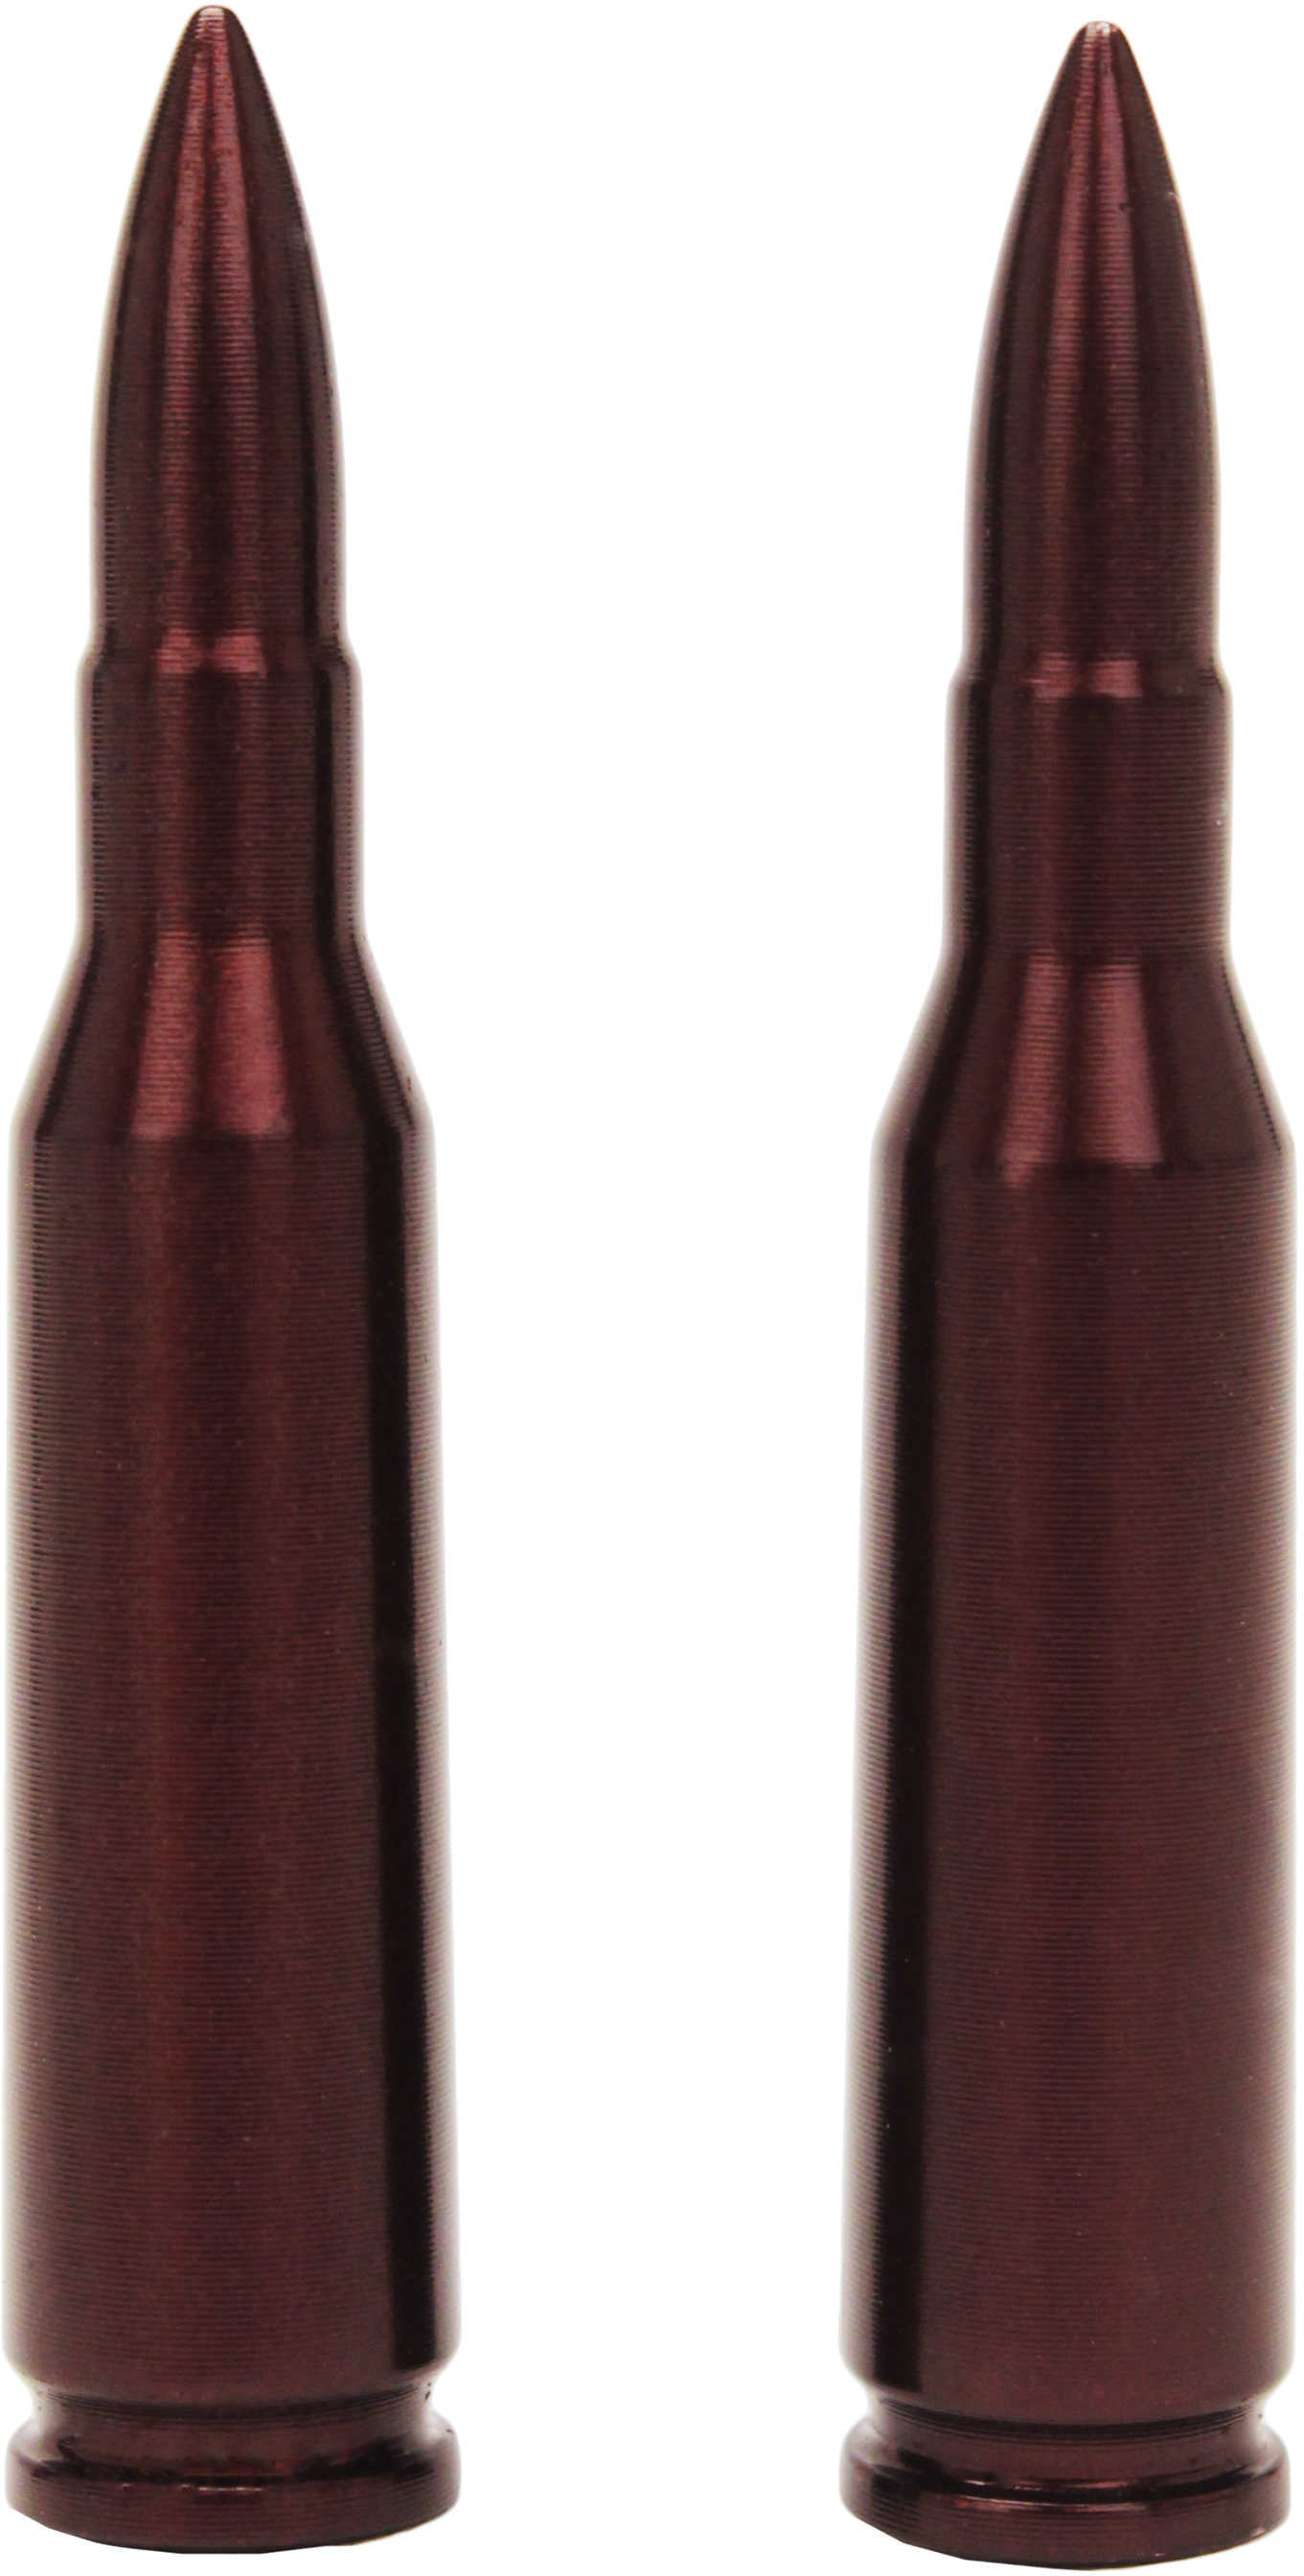 A-Zoom Snap Caps 5.45 x 39R 2 Pack 12285